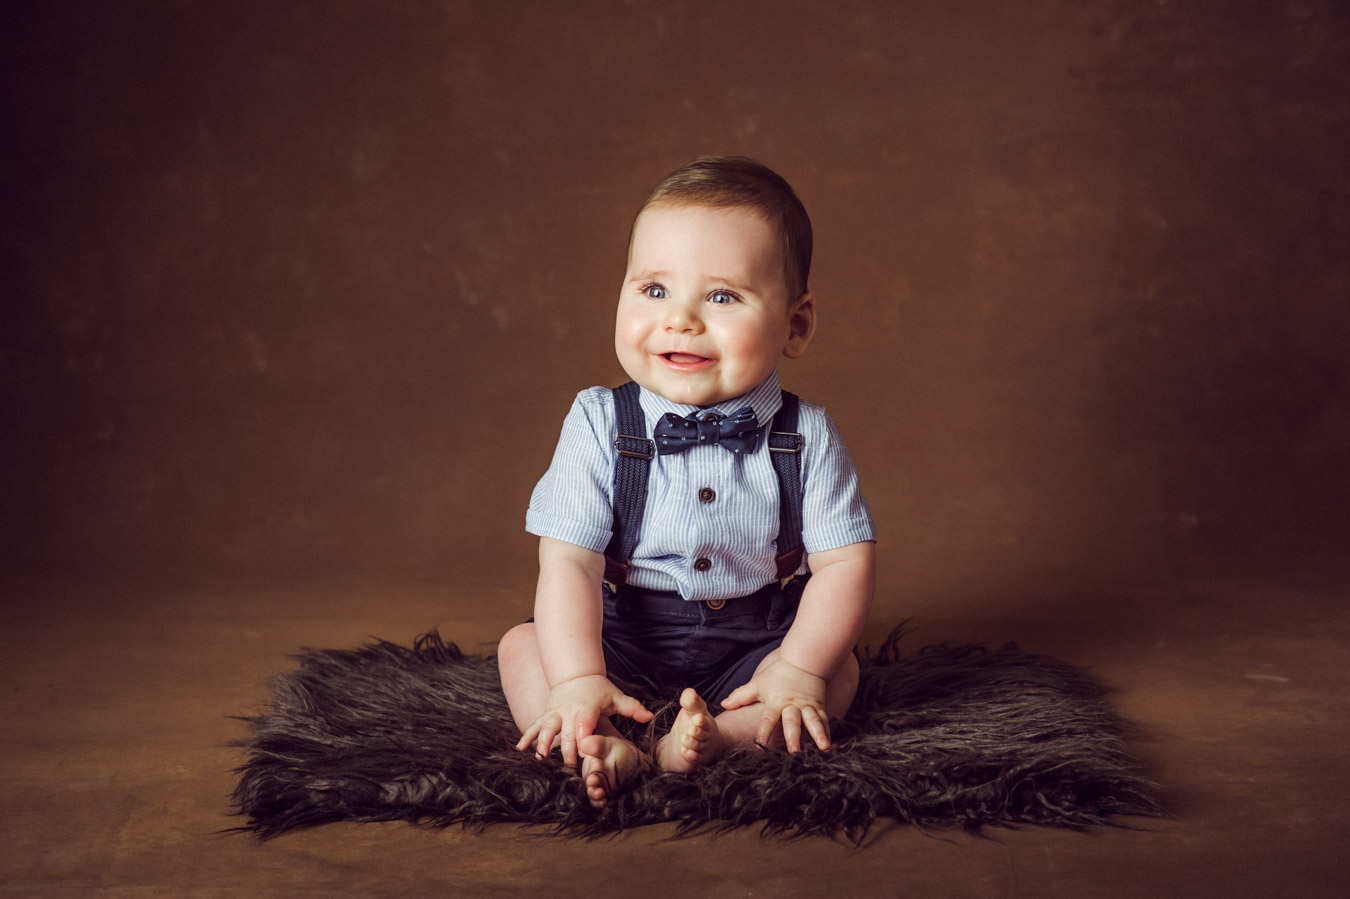 The Best 5 Tips for Baby Photographers we've found